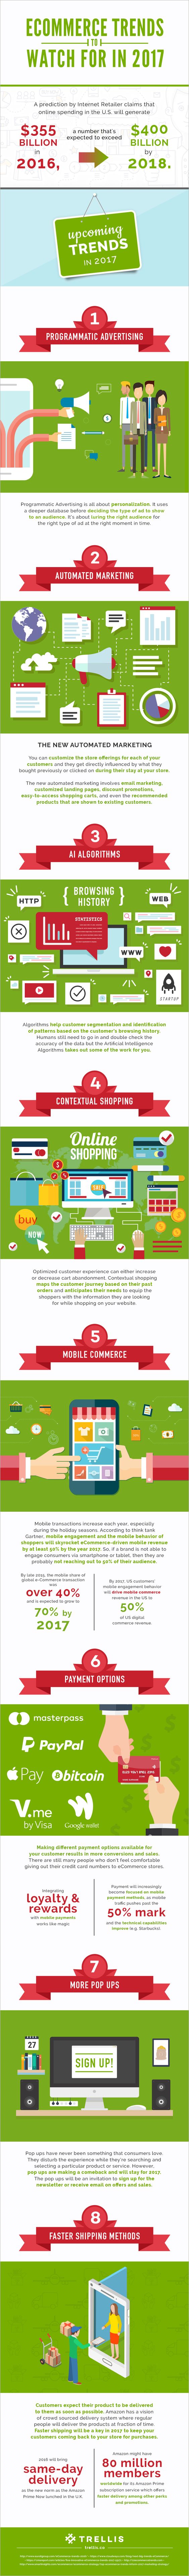 Ecommerce trends to watch for in 2017 statistics infographic